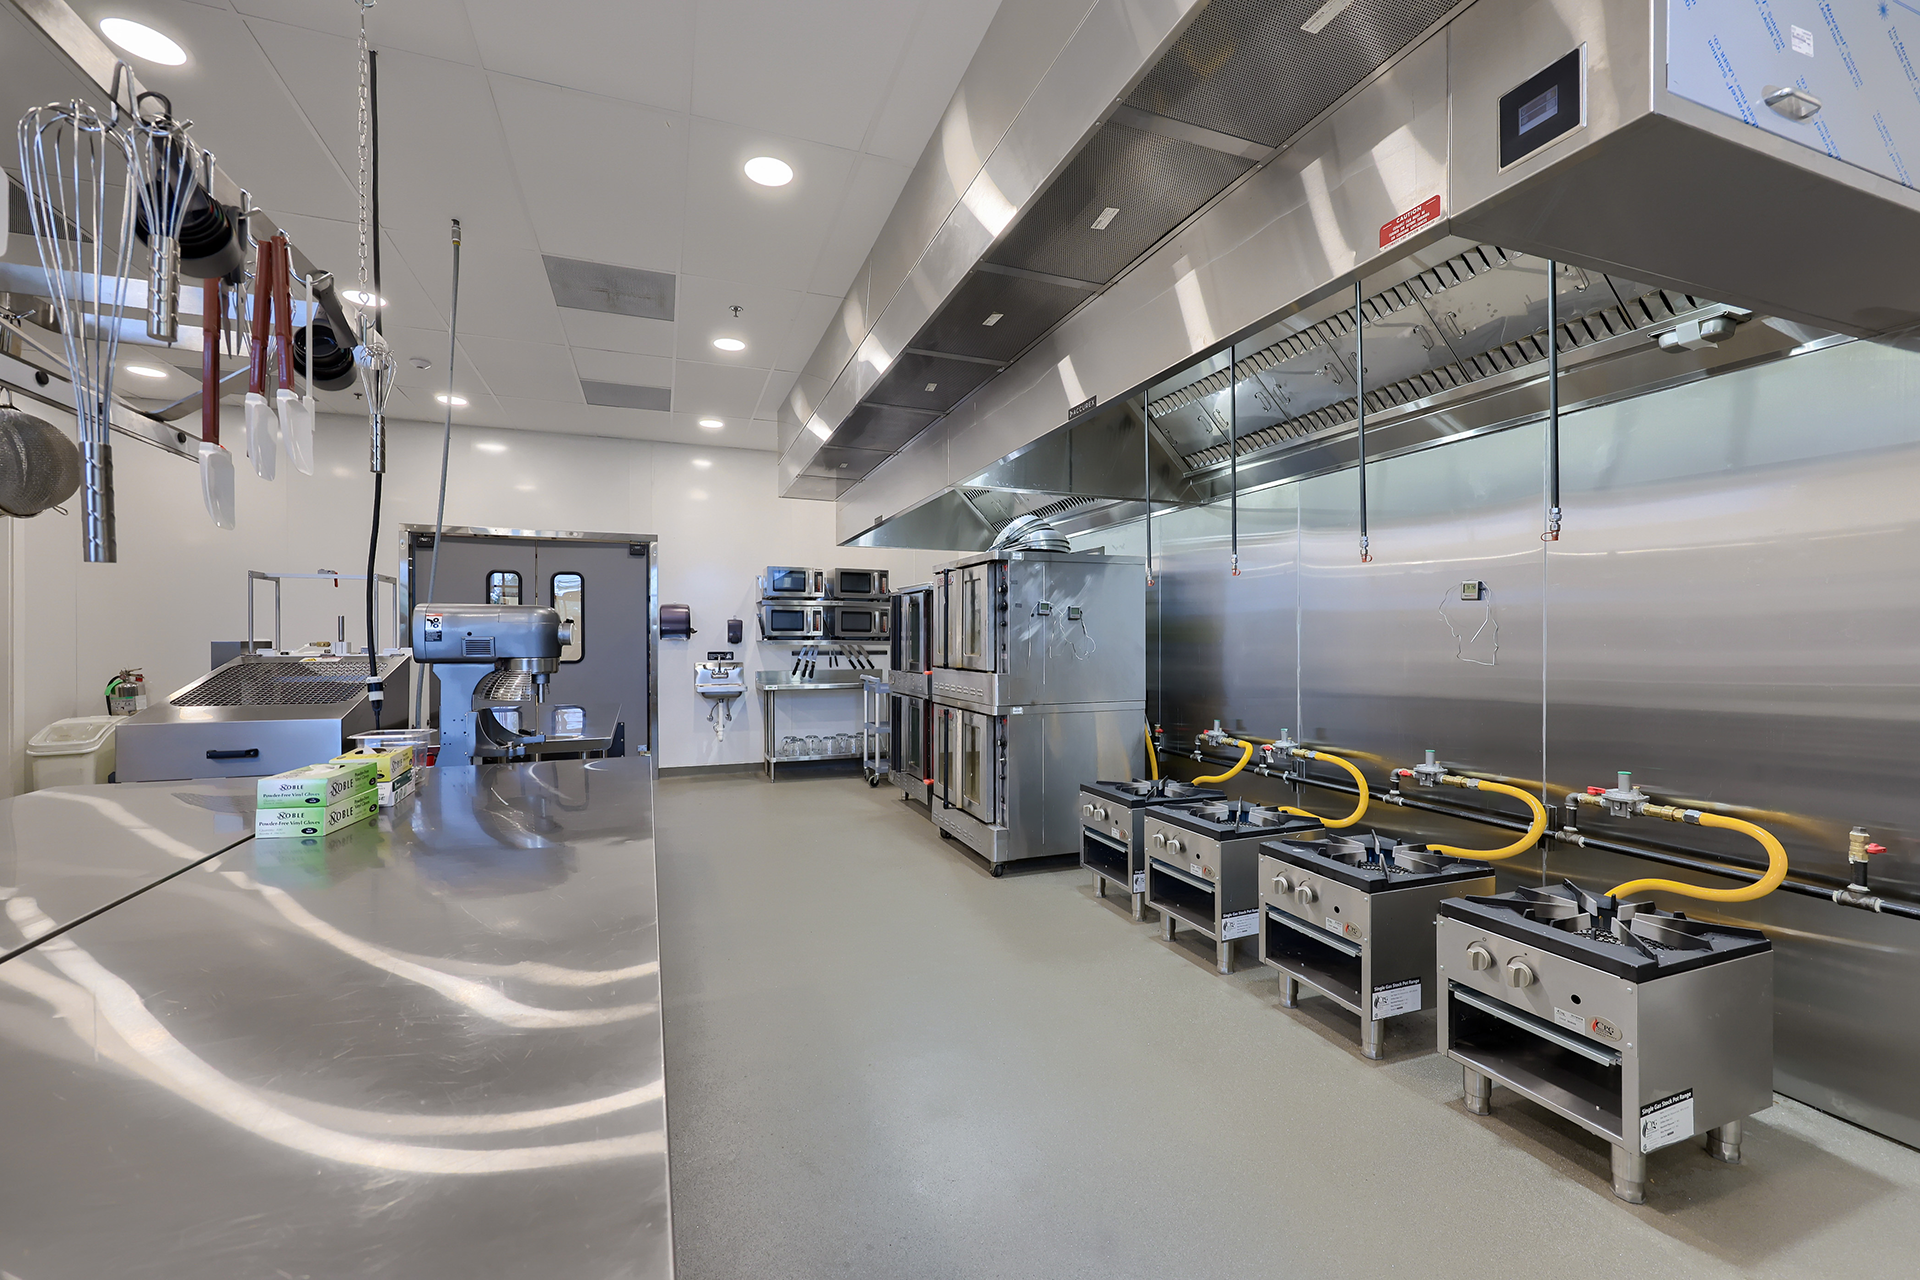 Altro flooring in commercial kitchen